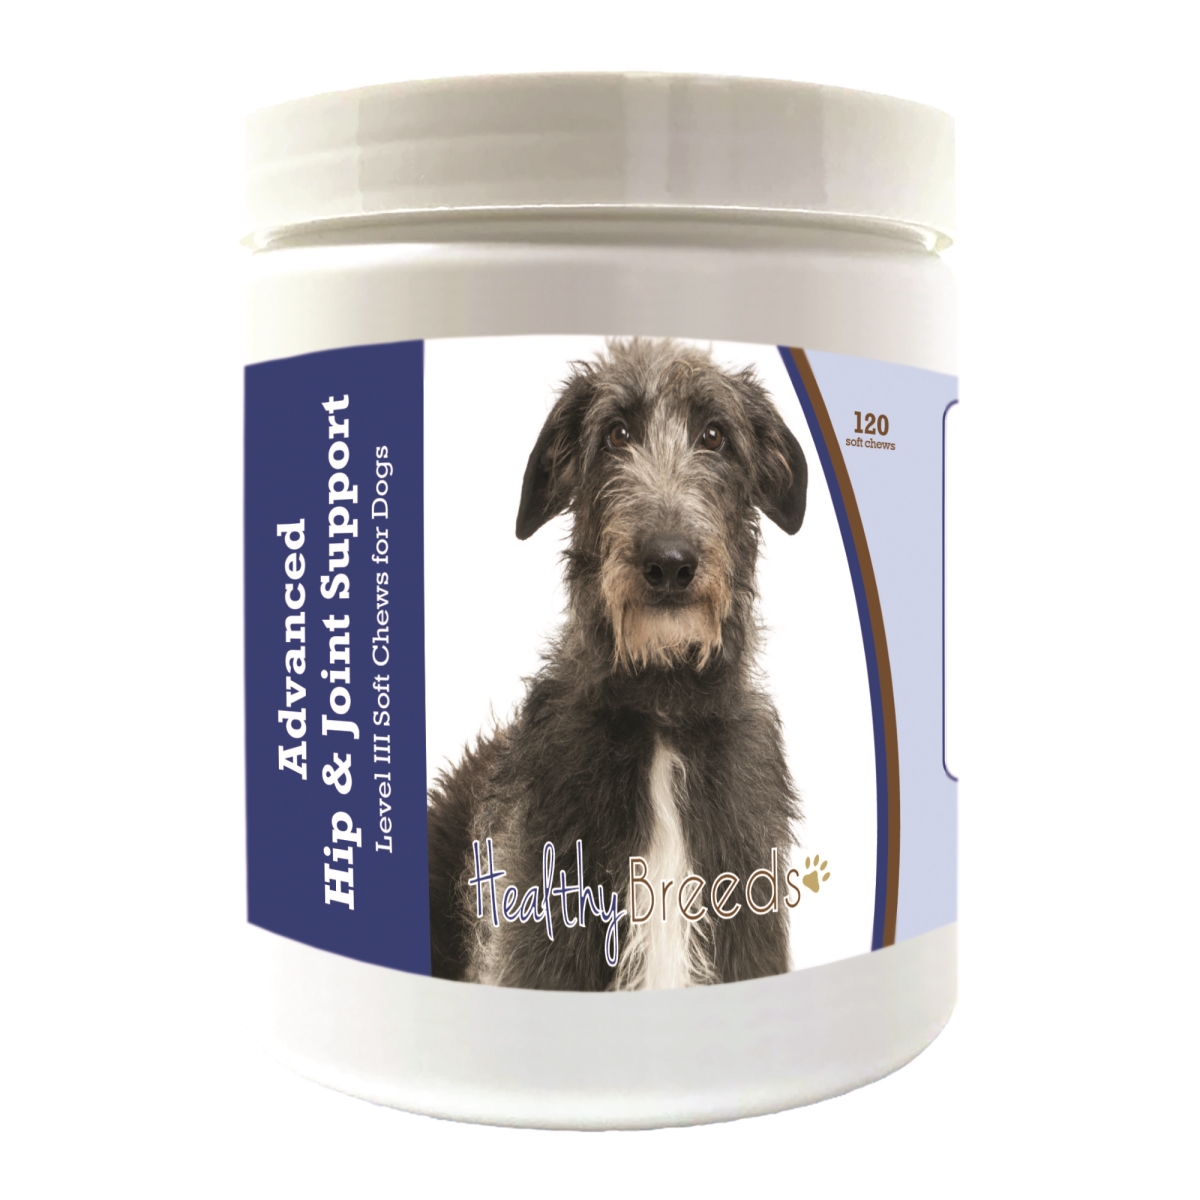 Picture of Healthy Breeds 192959899184 Scottish Deerhound Advanced Hip & Joint Support Level III Soft Chews for Dogs